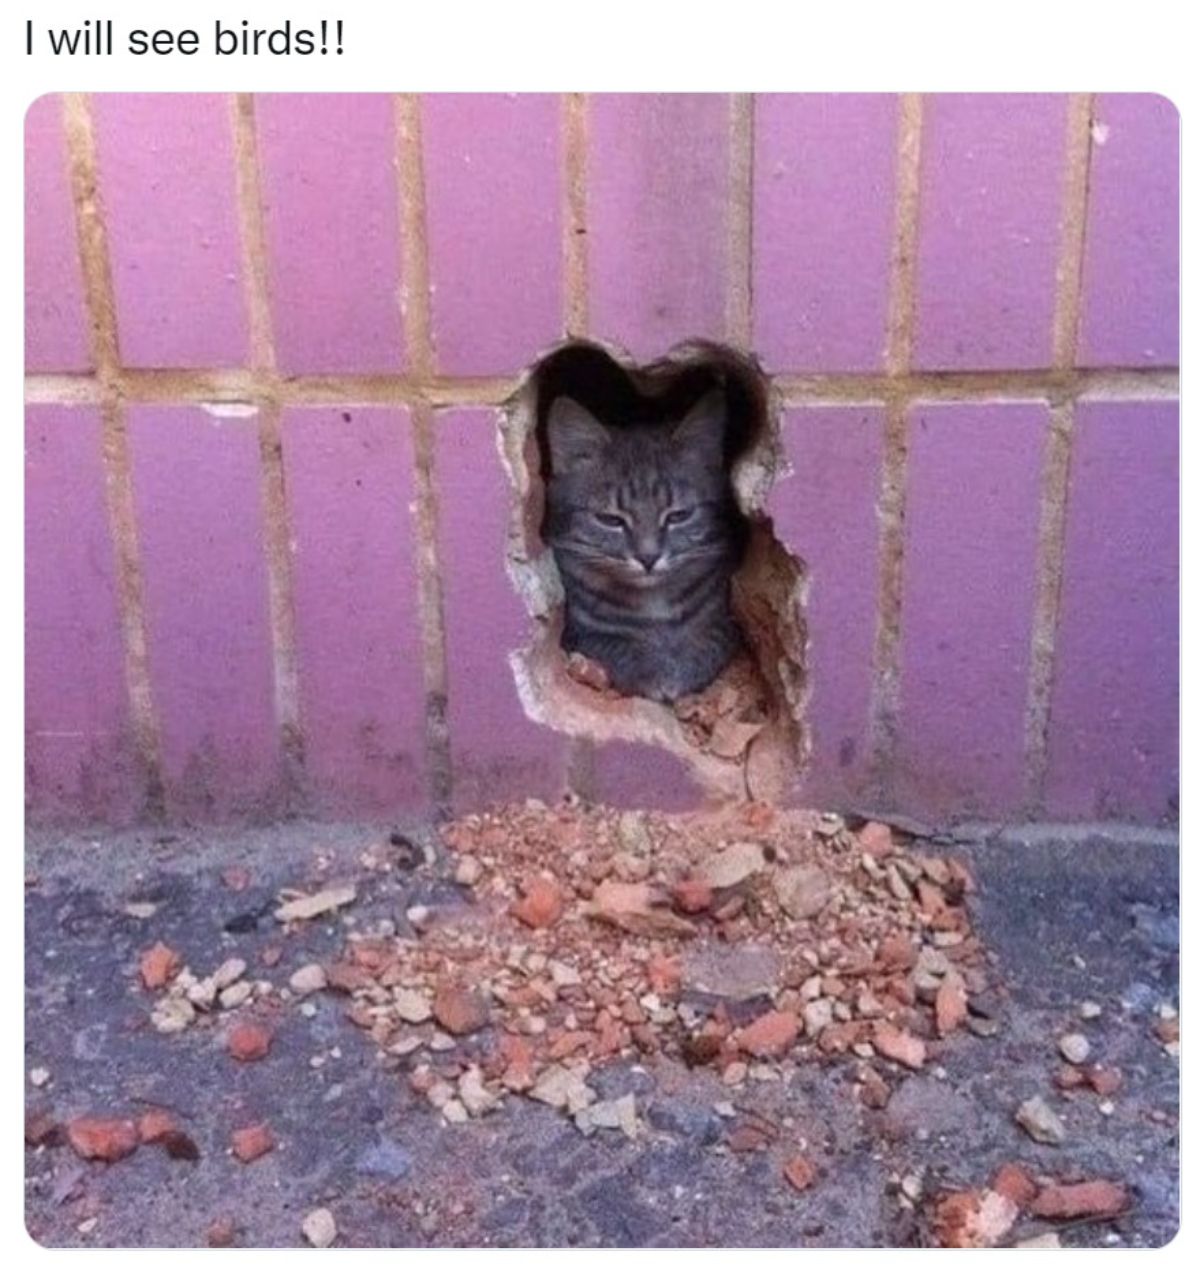 grey tabby cat sitting in a cat-shaped gap in a pink wall with bits of the wall on the ground in front of it and a caption over the photo saying i will see birds!!